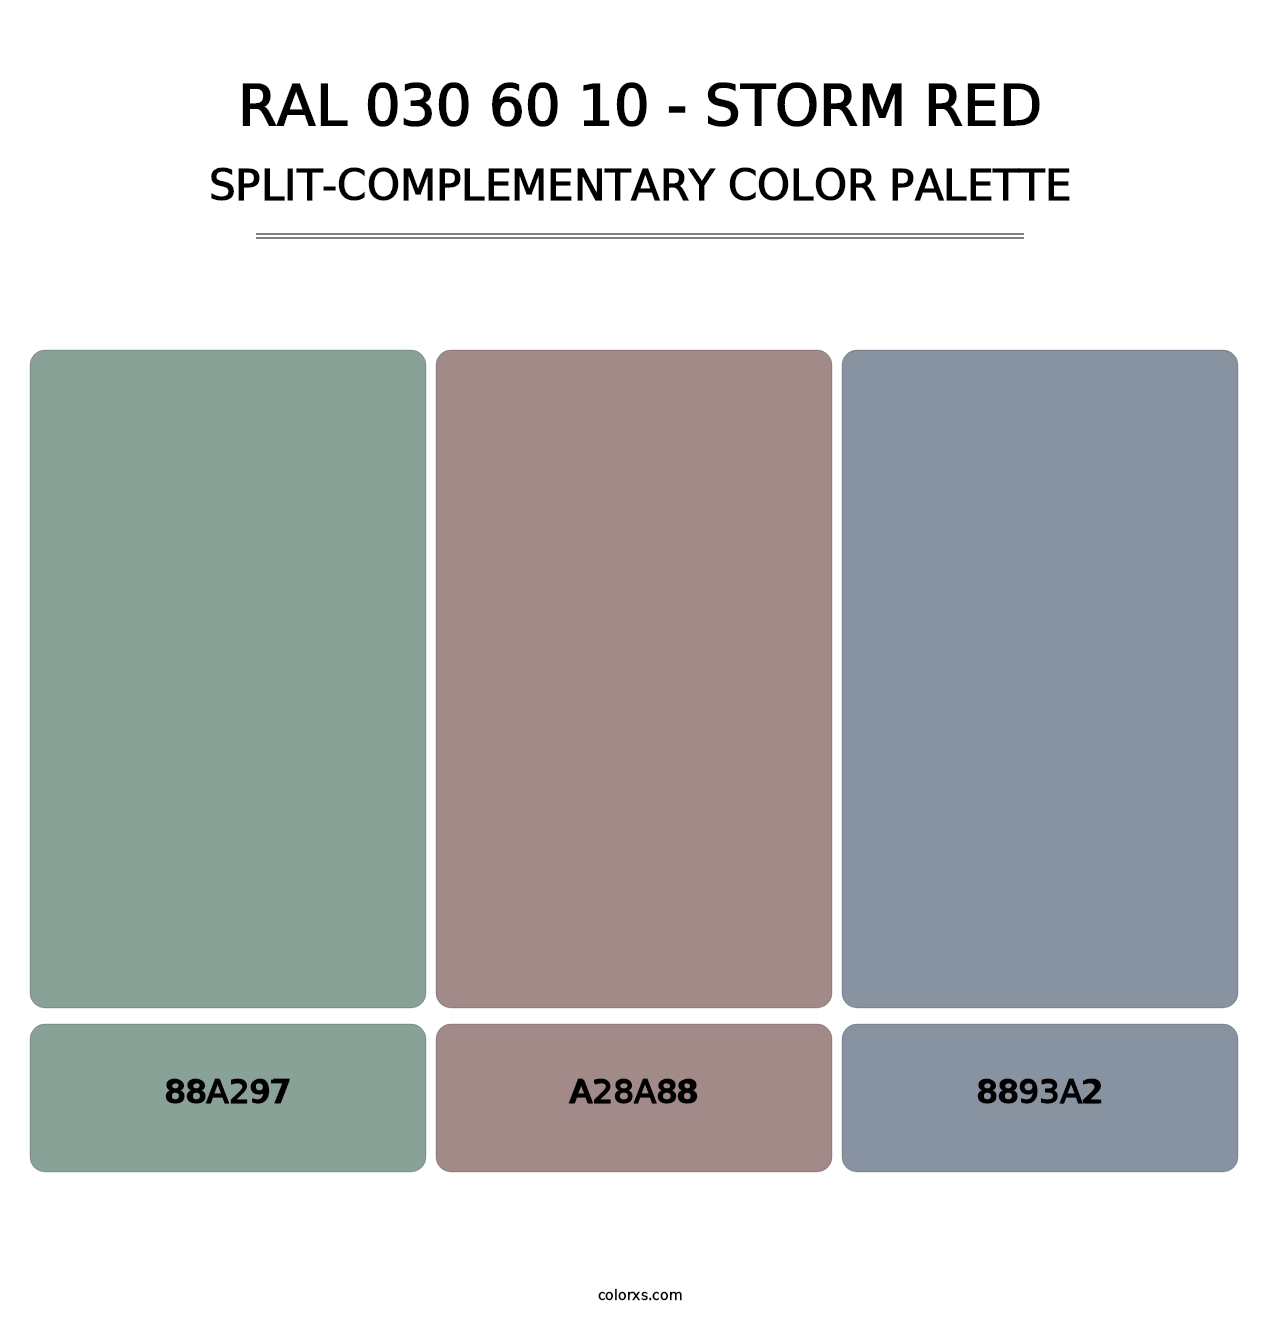 RAL 030 60 10 - Storm Red - Split-Complementary Color Palette